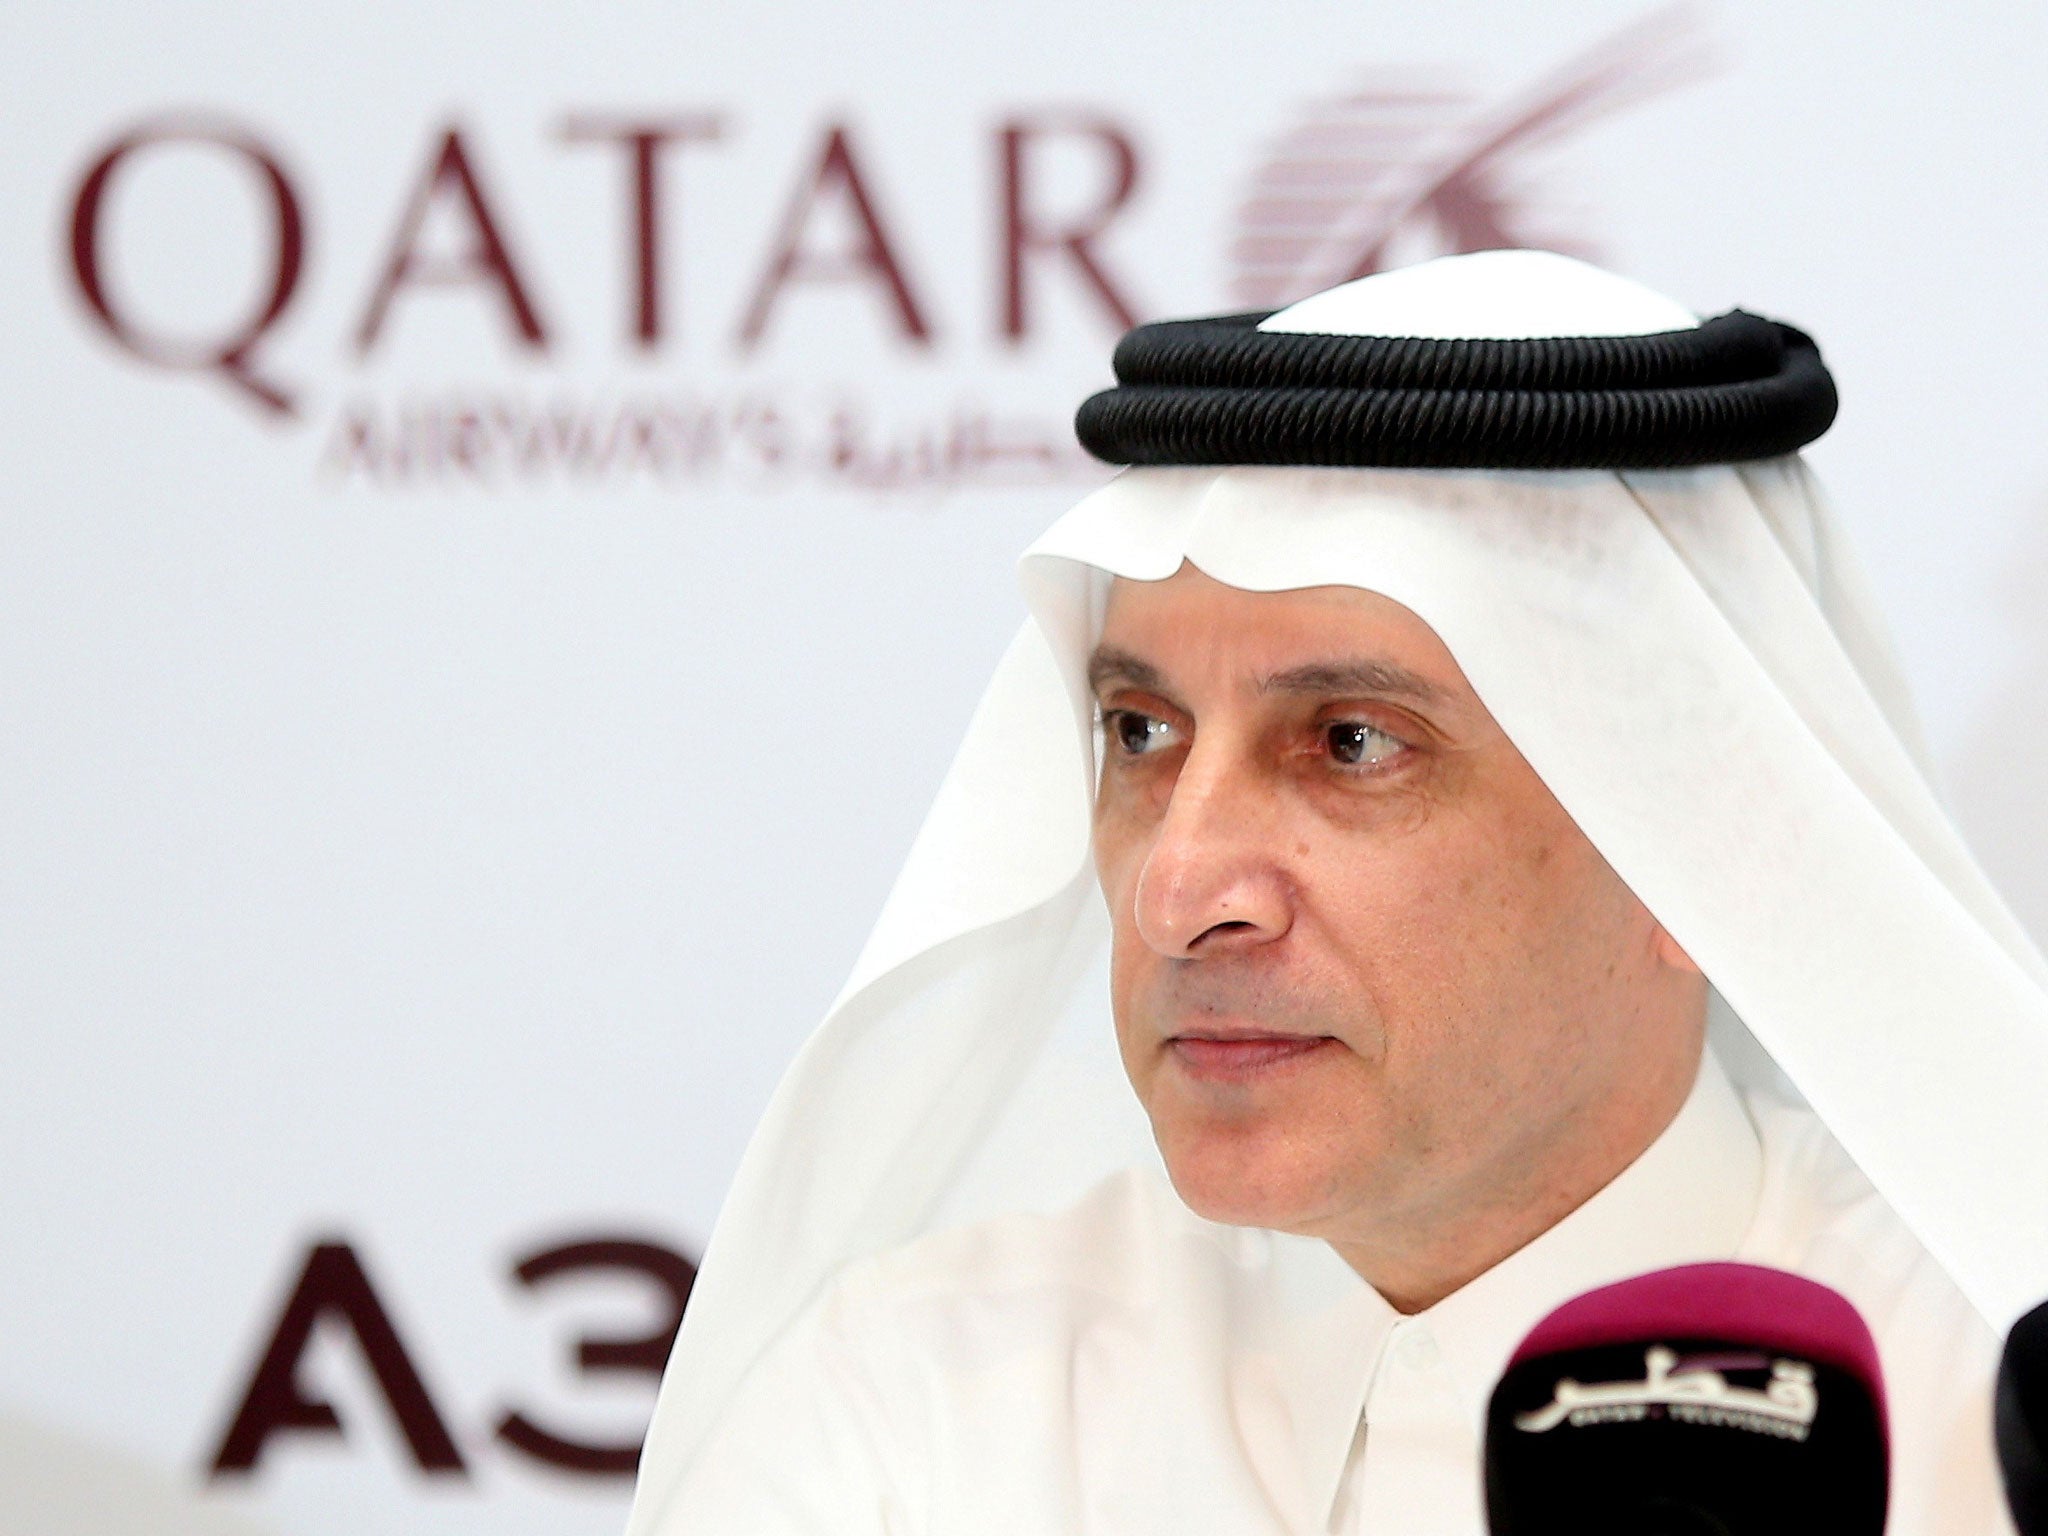 Qatar Airways chief executive Akbar Al Baker said BA's valuation after the vote made it an 'attractive opportunity'